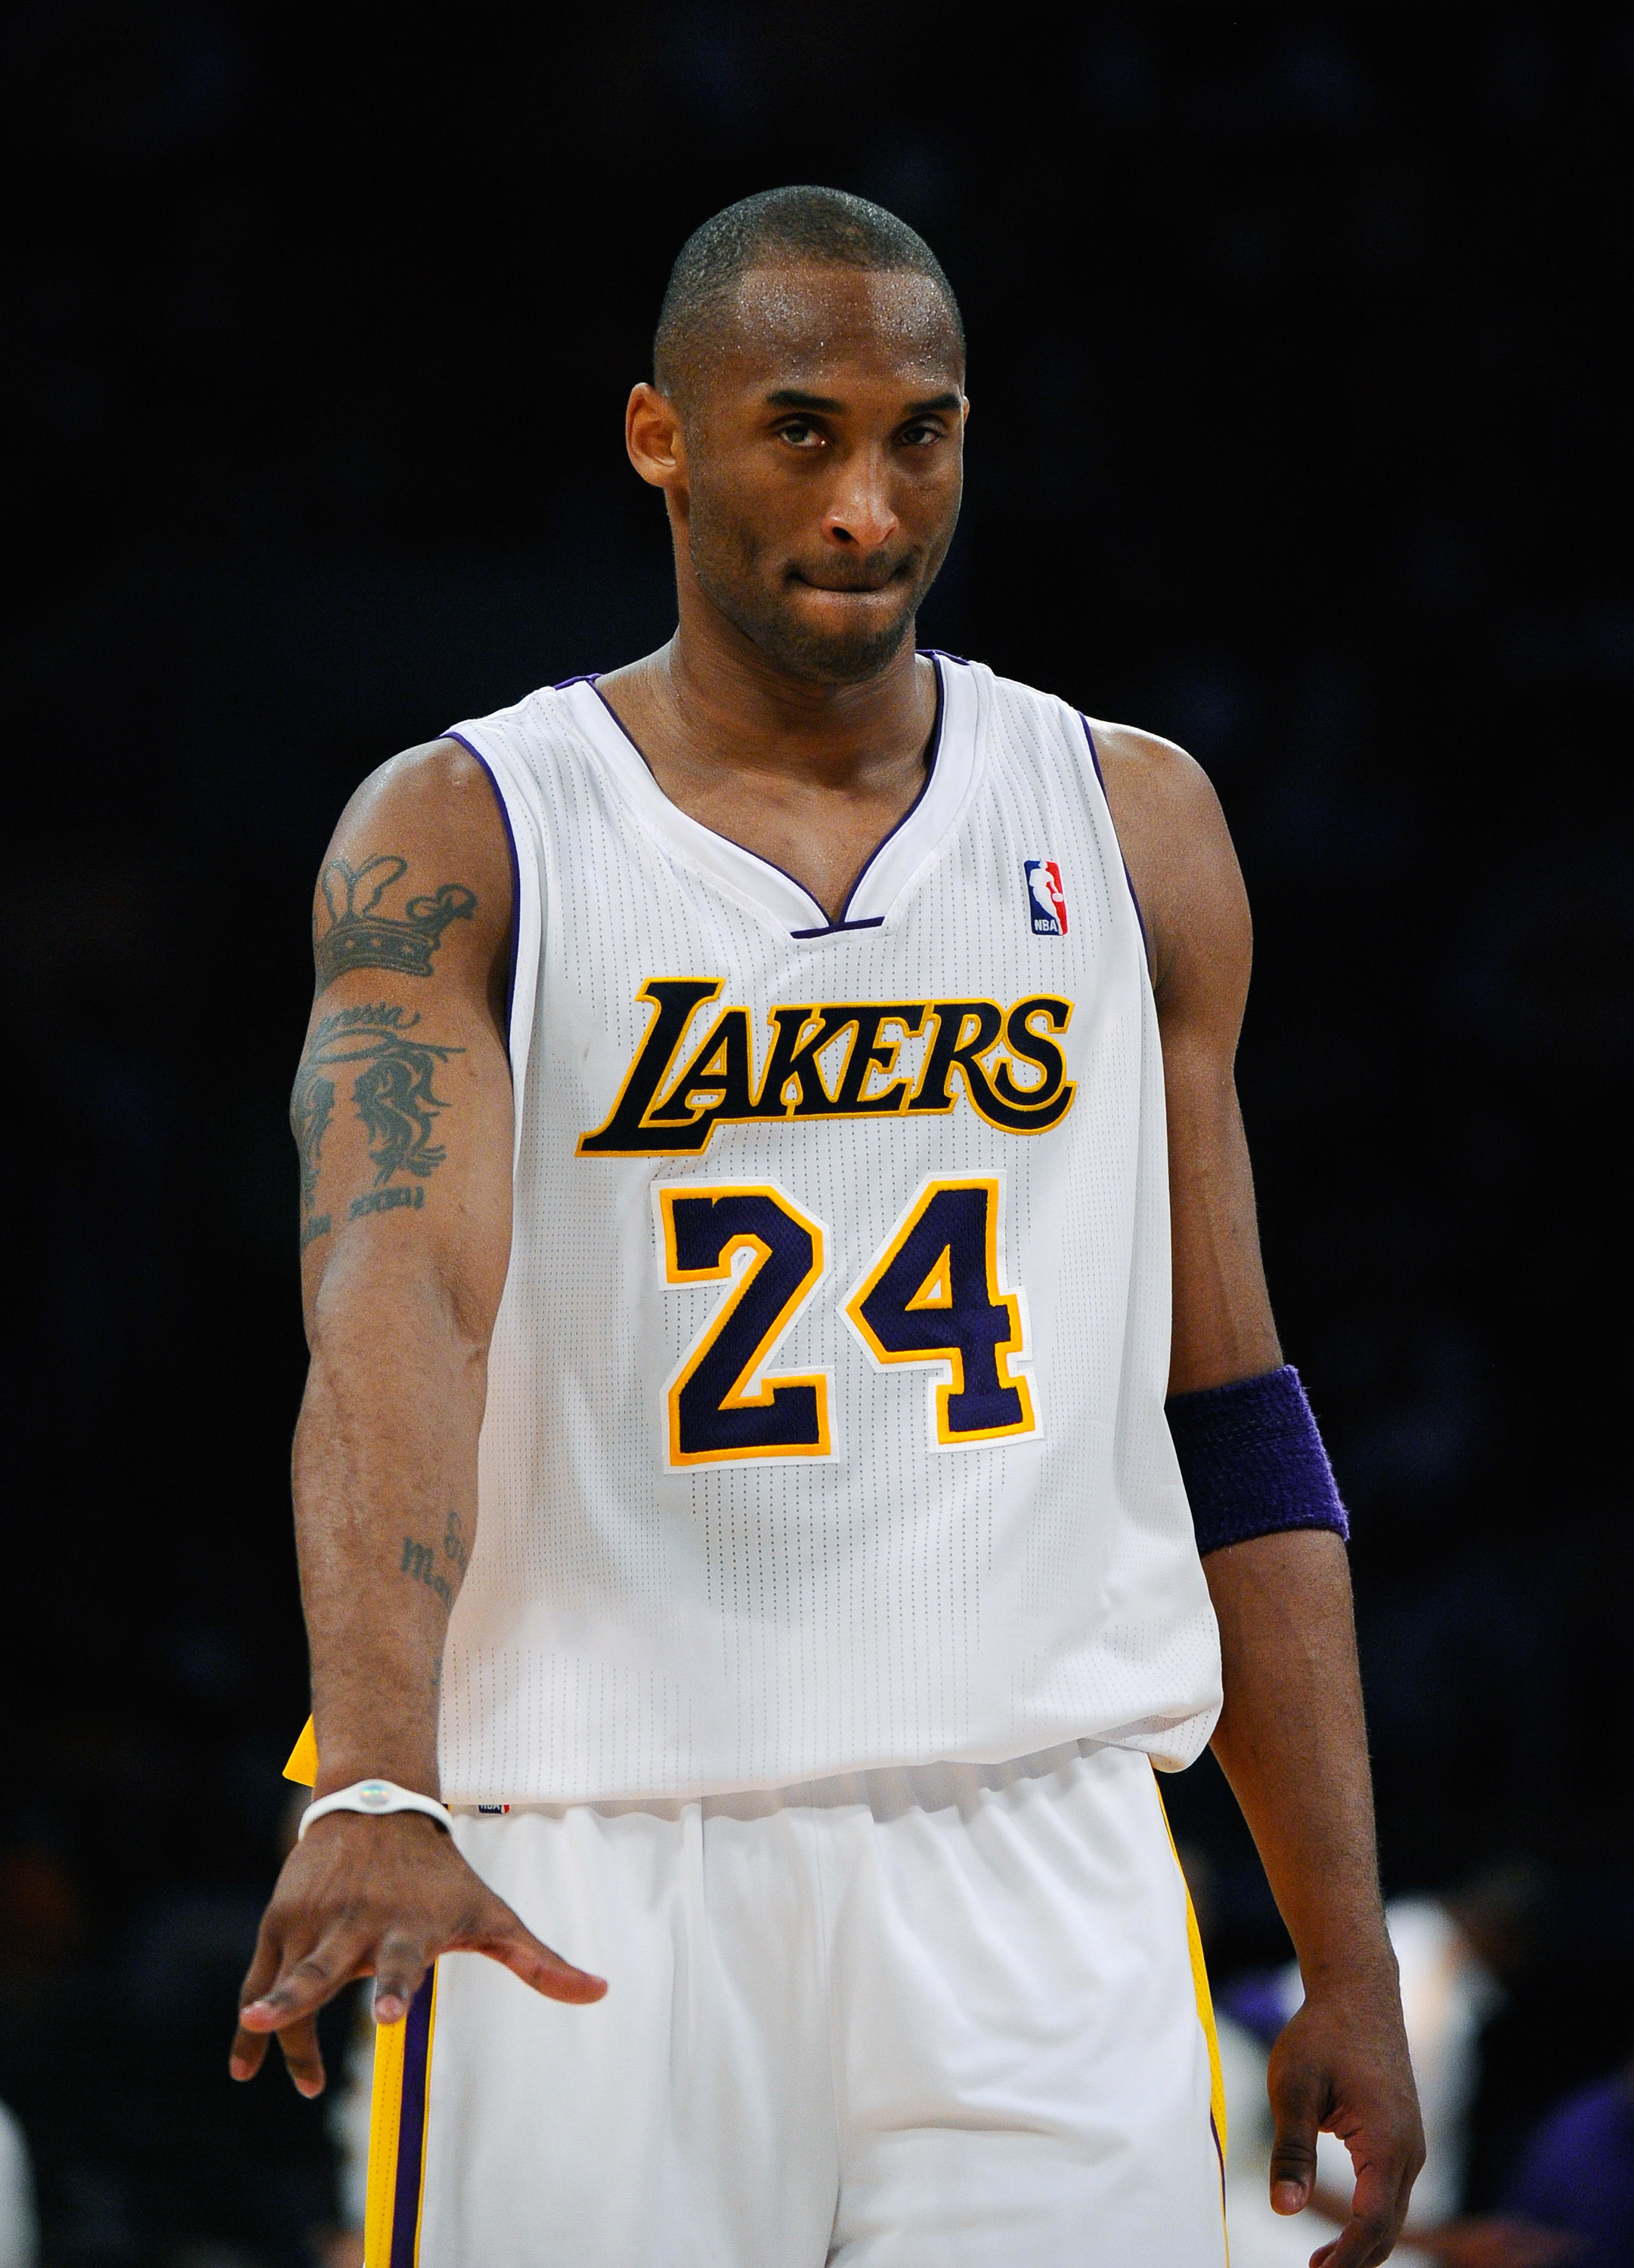 LOS ANGELES, CA - APRIL 03:  Kobe Bryant #24 of the Los Angeles Lakers during the game against Denver Nuggets at Staples Center on April 3, 2011 in Los Angeles, California. NOTE TO USER: User expressly acknowledges and agrees that, by downloading and or u